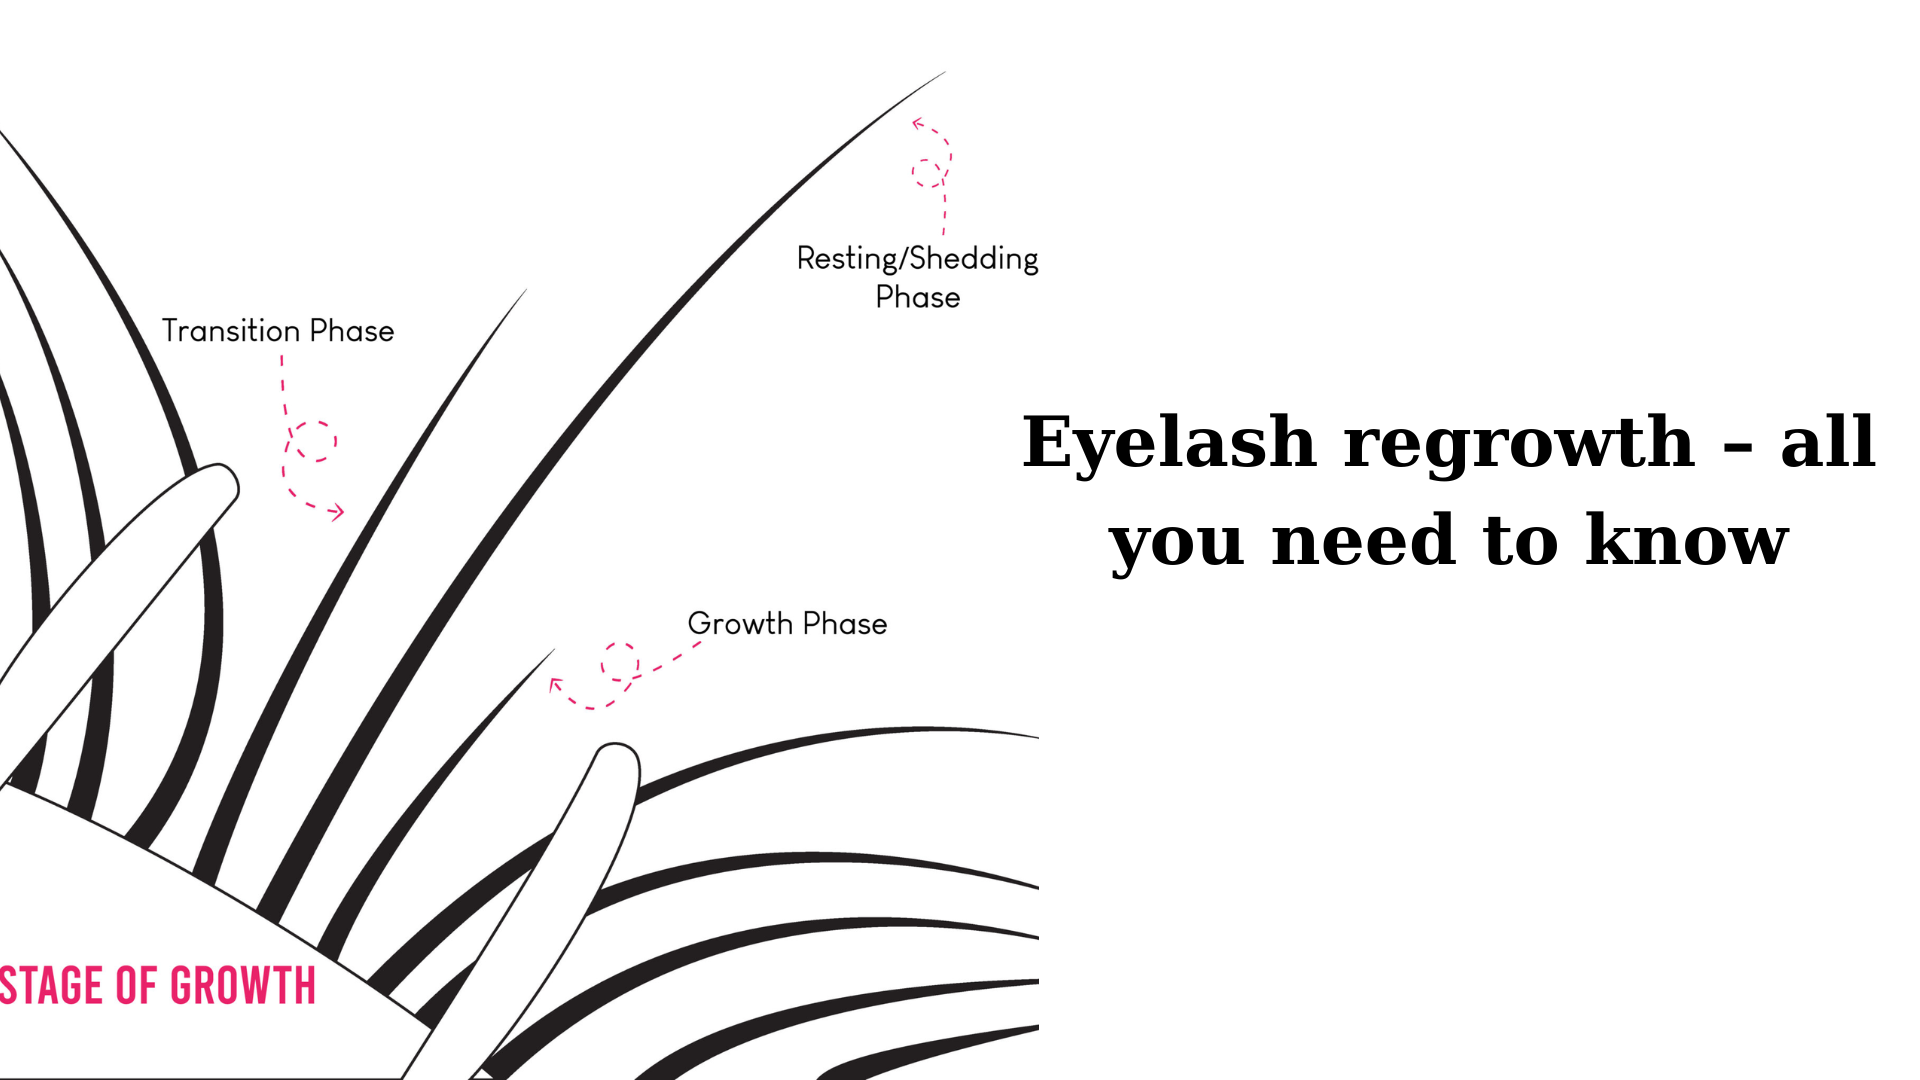 Eyelash regrowth – all you need to know